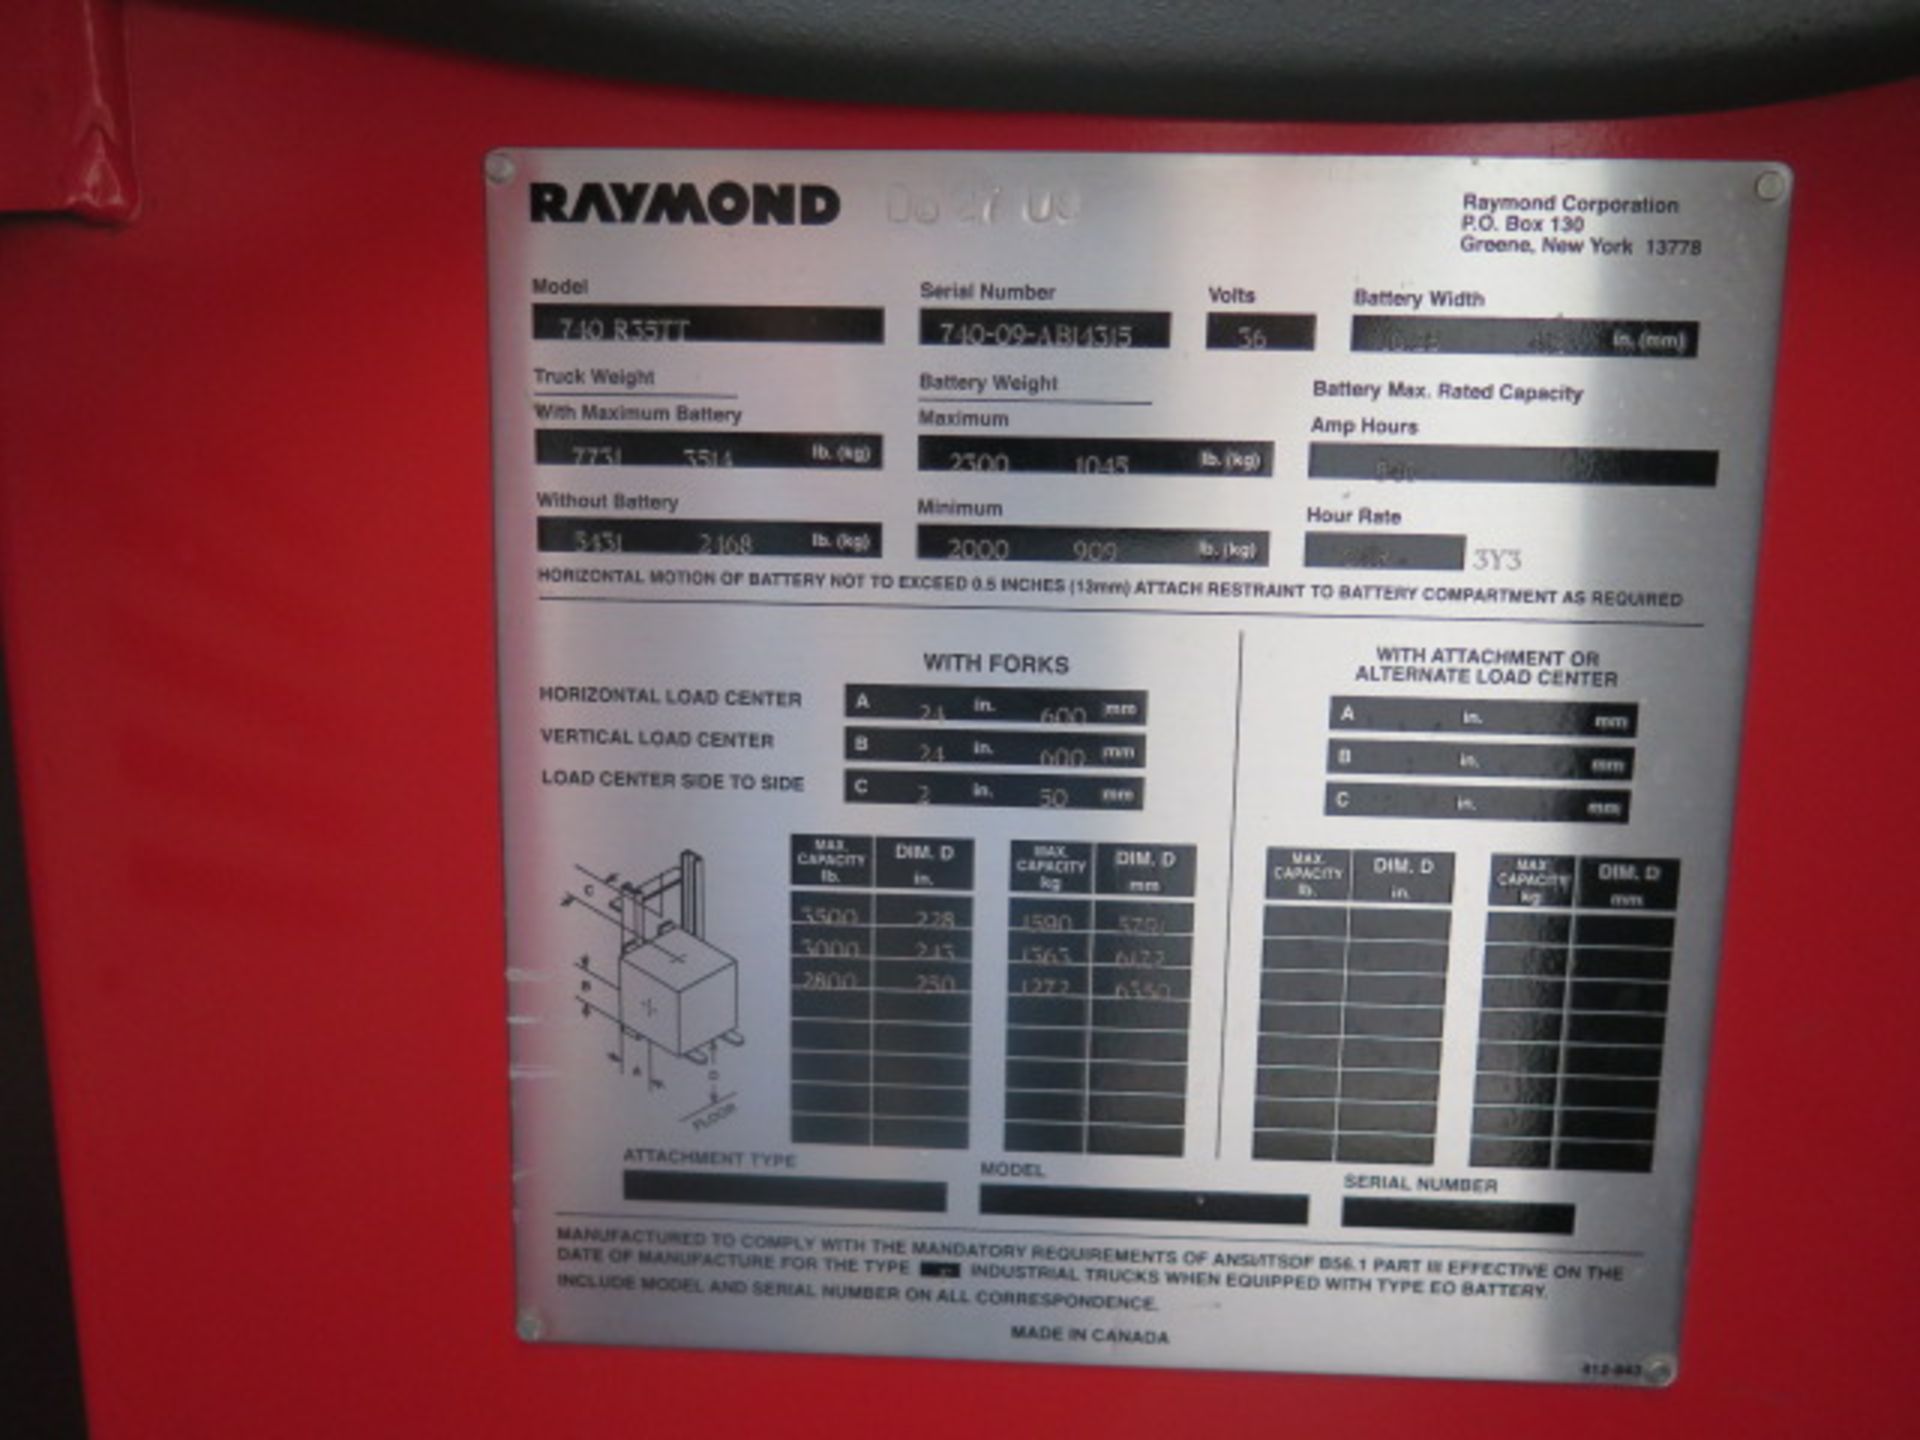 Raymond 740 R35TT 3500 Lb Cap Stand-In Reach Fork Elec Pallet Mover s/n 740-09-AB14315, SOLD AS IS - Image 14 of 14